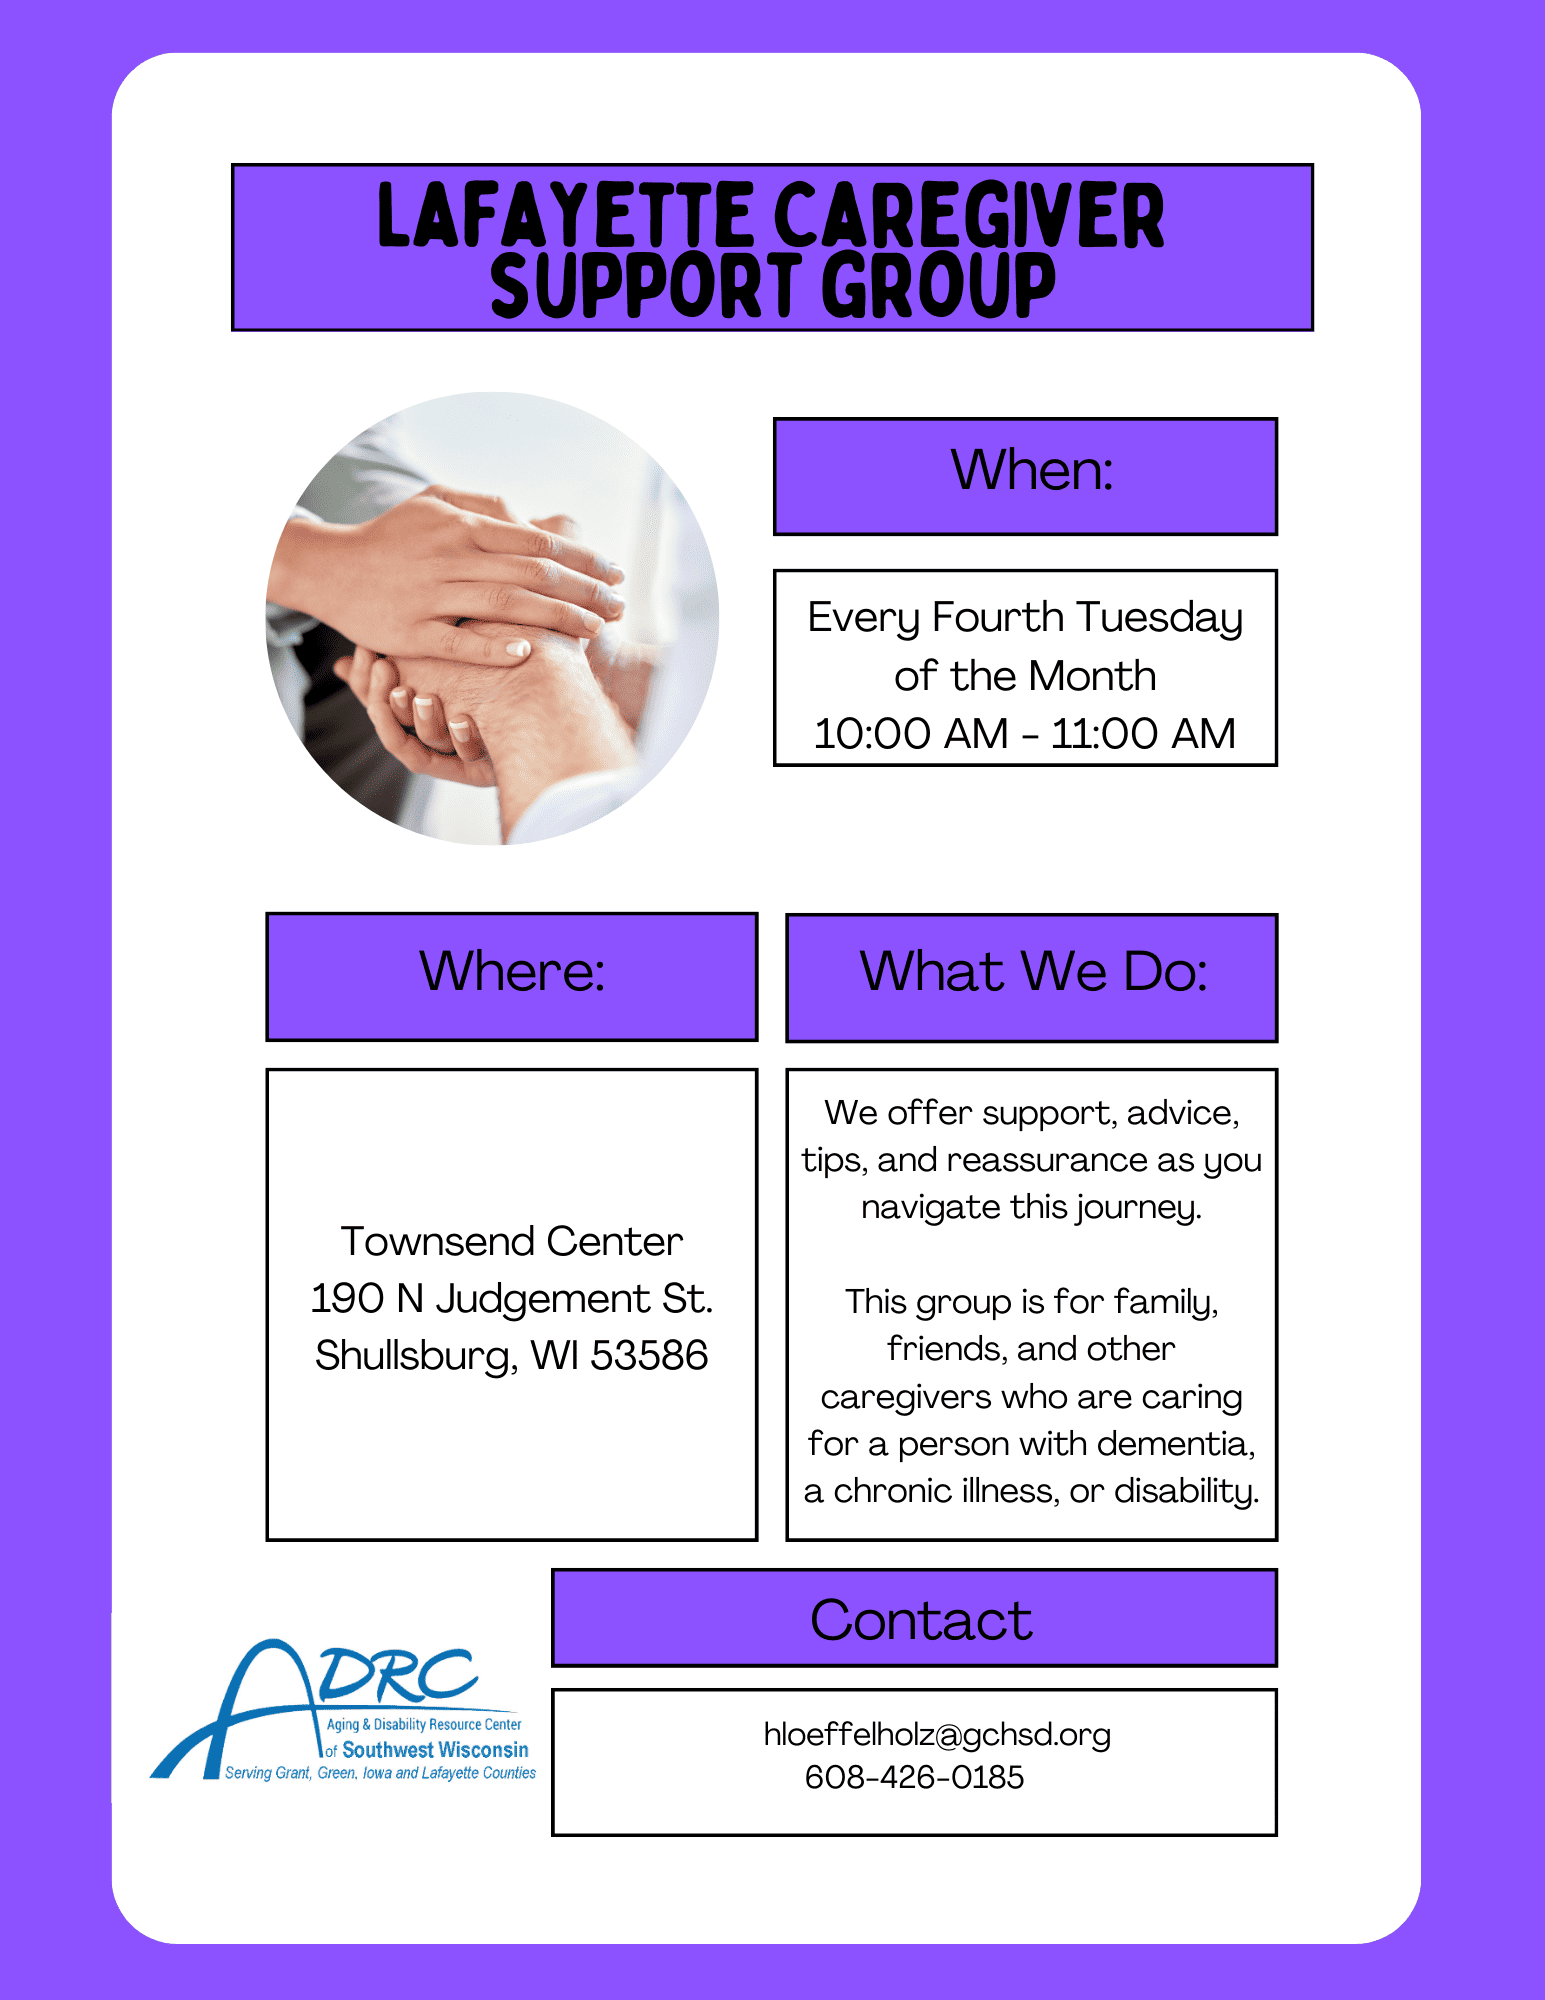 Lafayette Caregiver Support Group @ Townsend Center